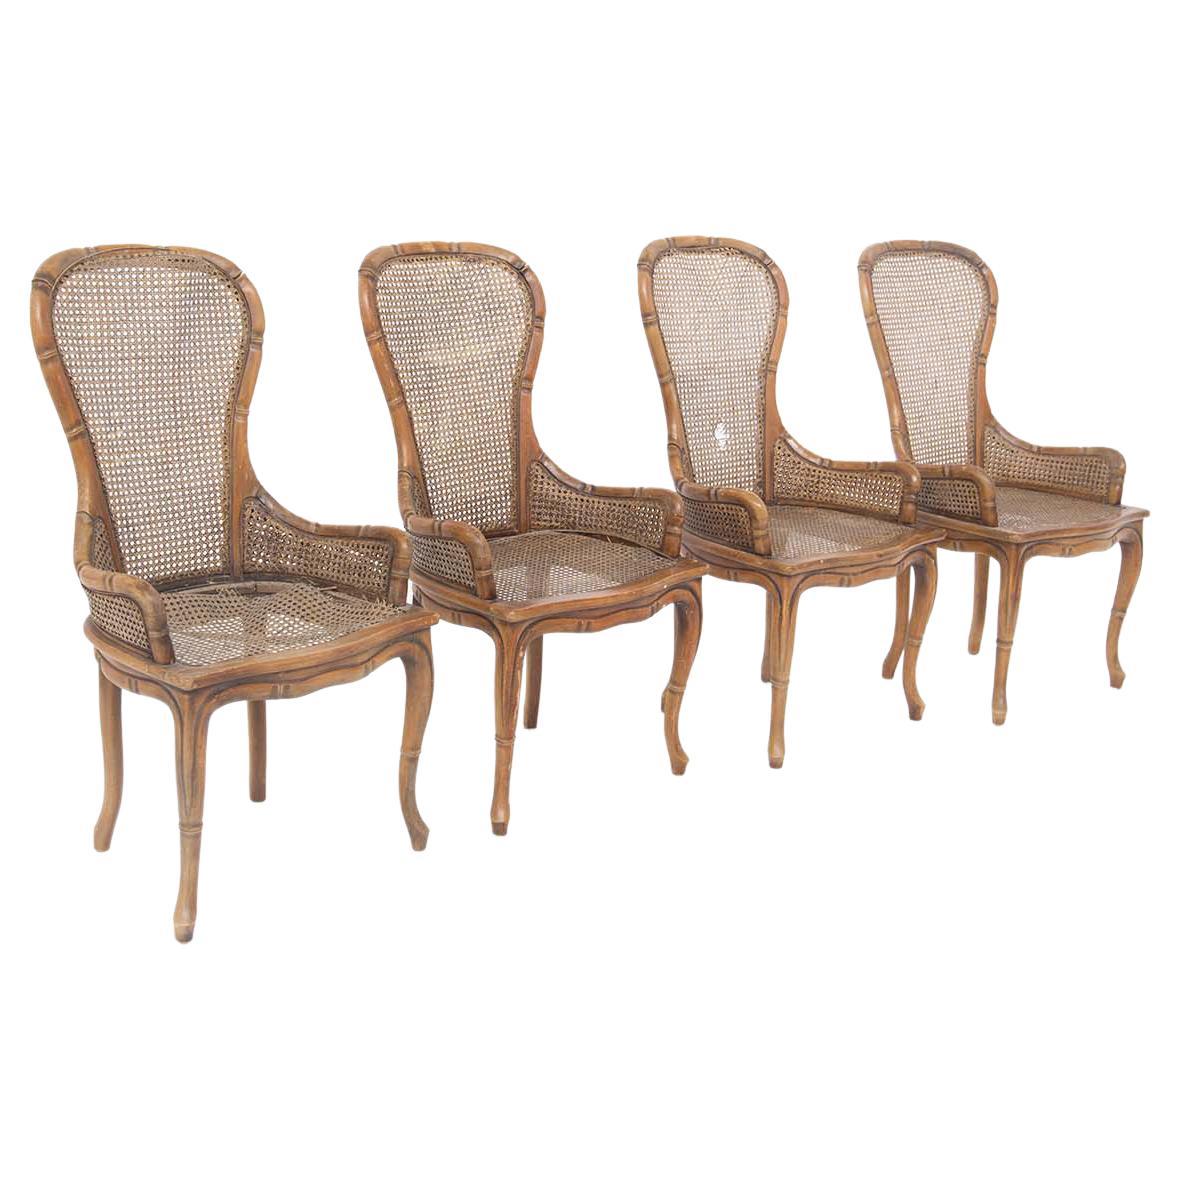 Italian Four Chairs by Giorgetti in Imitation Bamboo and Rattan